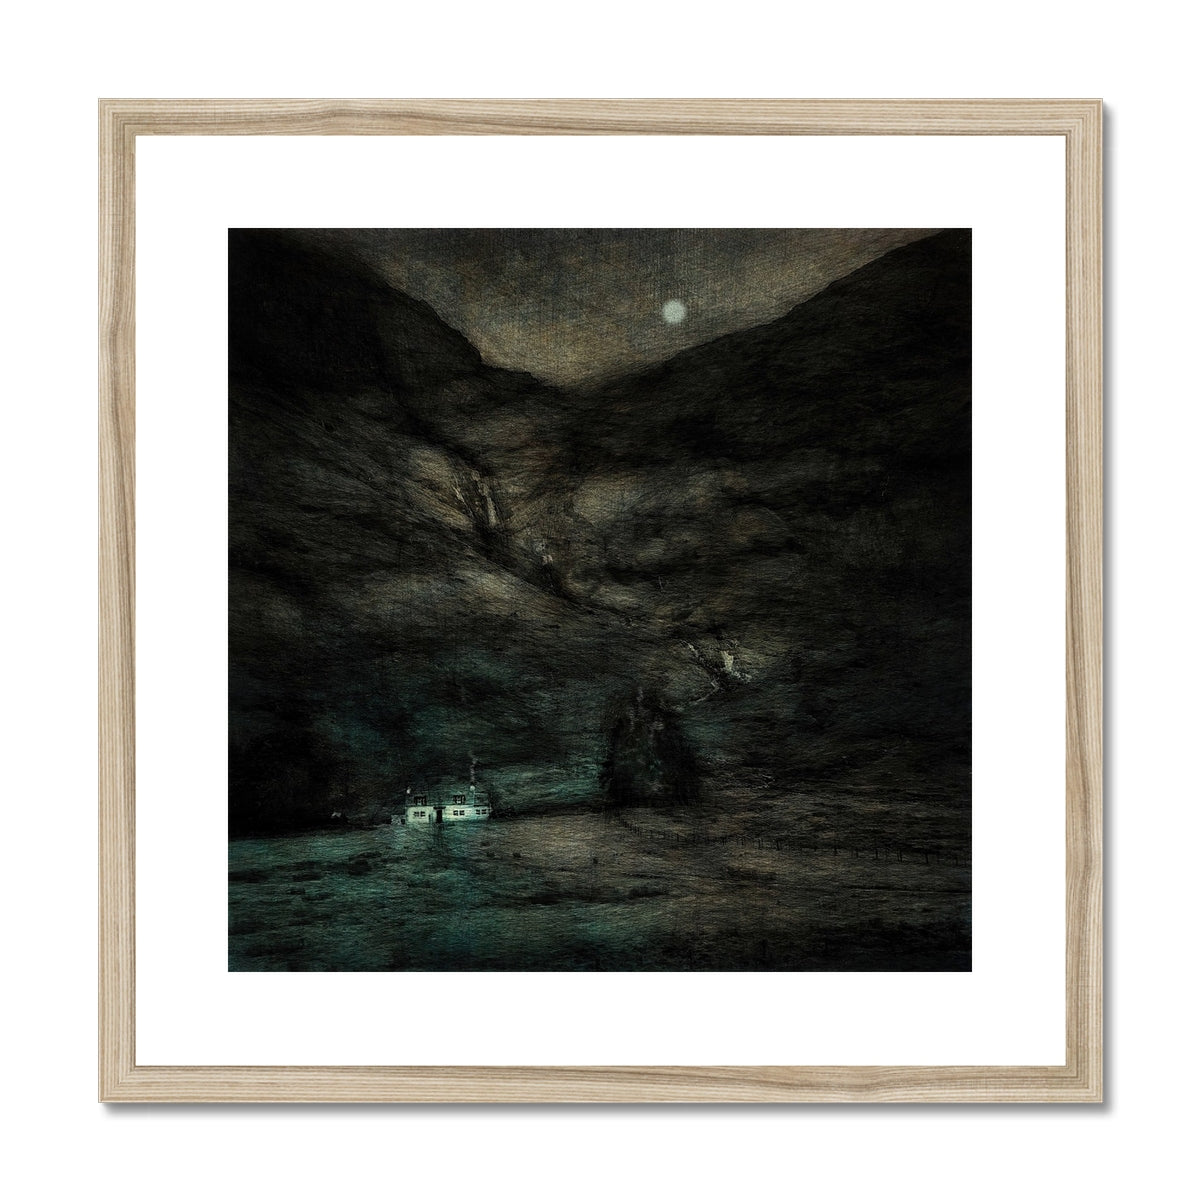 Glencoe Cottage Moonlight Painting | Framed & Mounted Prints From Scotland-Framed & Mounted Prints-Glencoe Art Gallery-20"x20"-Natural Frame-Paintings, Prints, Homeware, Art Gifts From Scotland By Scottish Artist Kevin Hunter